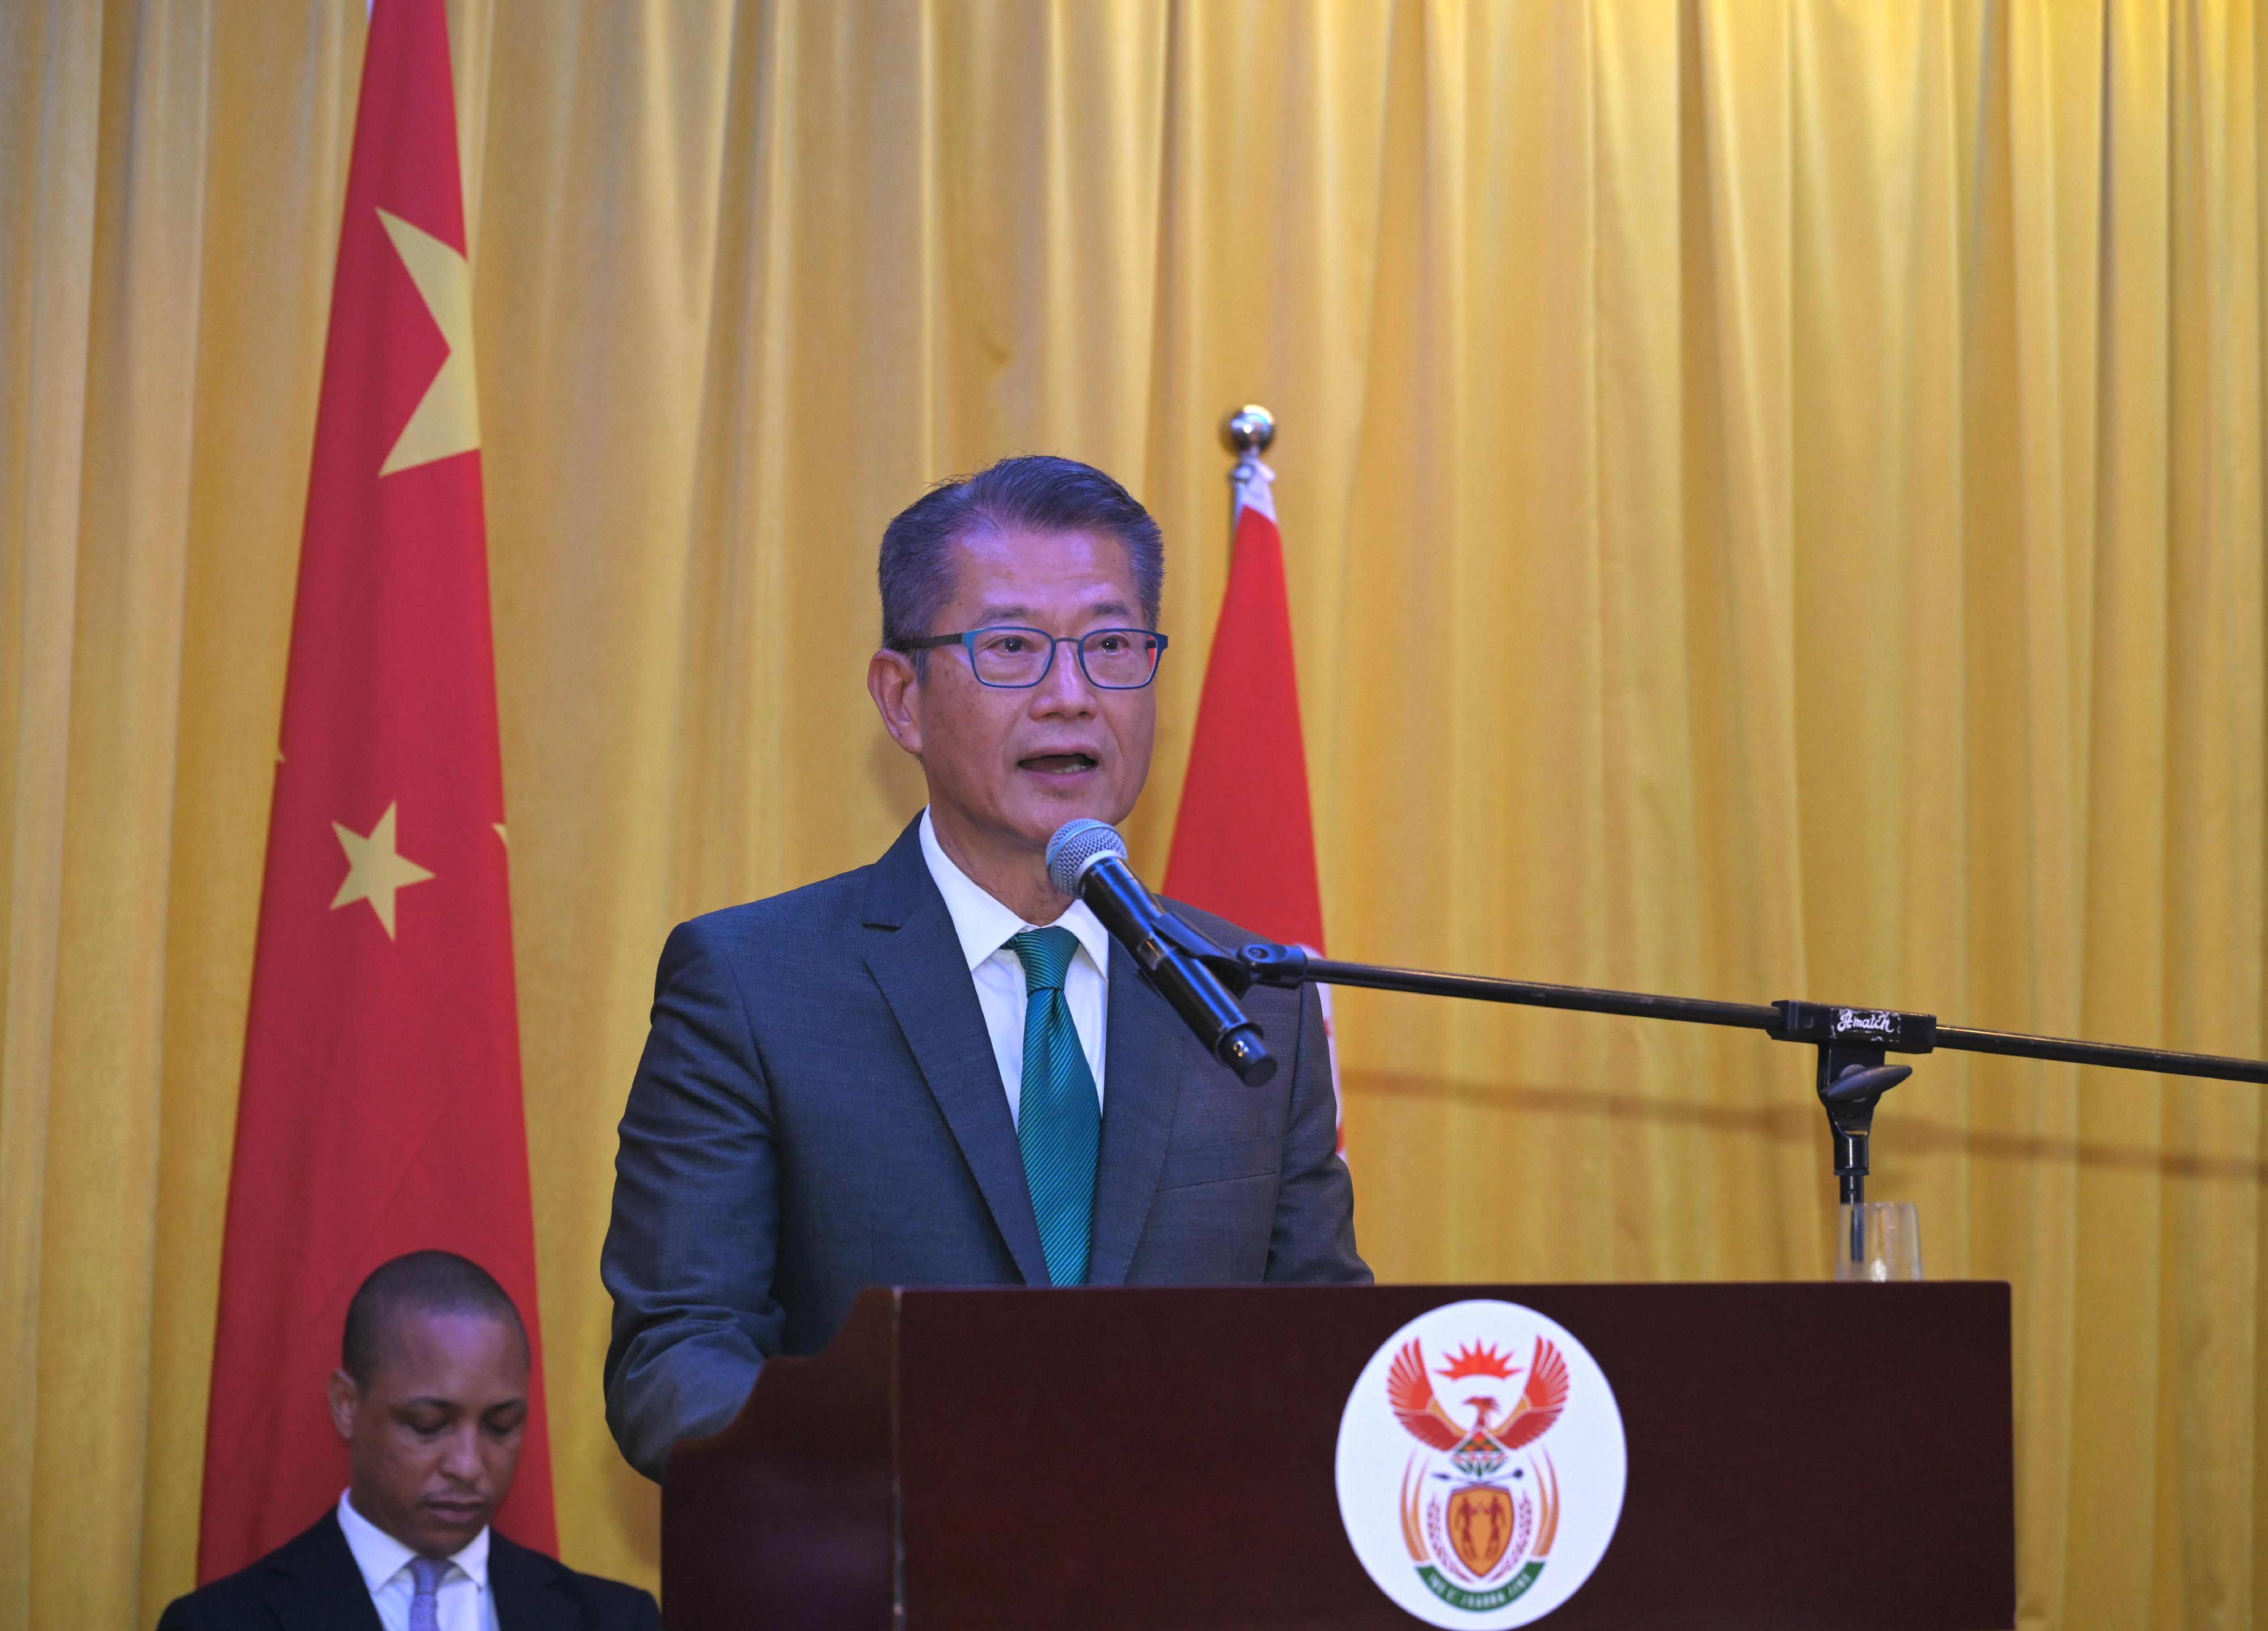 The Financial Secretary, Mr Paul Chan, speaks at the Republic of South Africa: National Freedom Day Reception today (April 27).